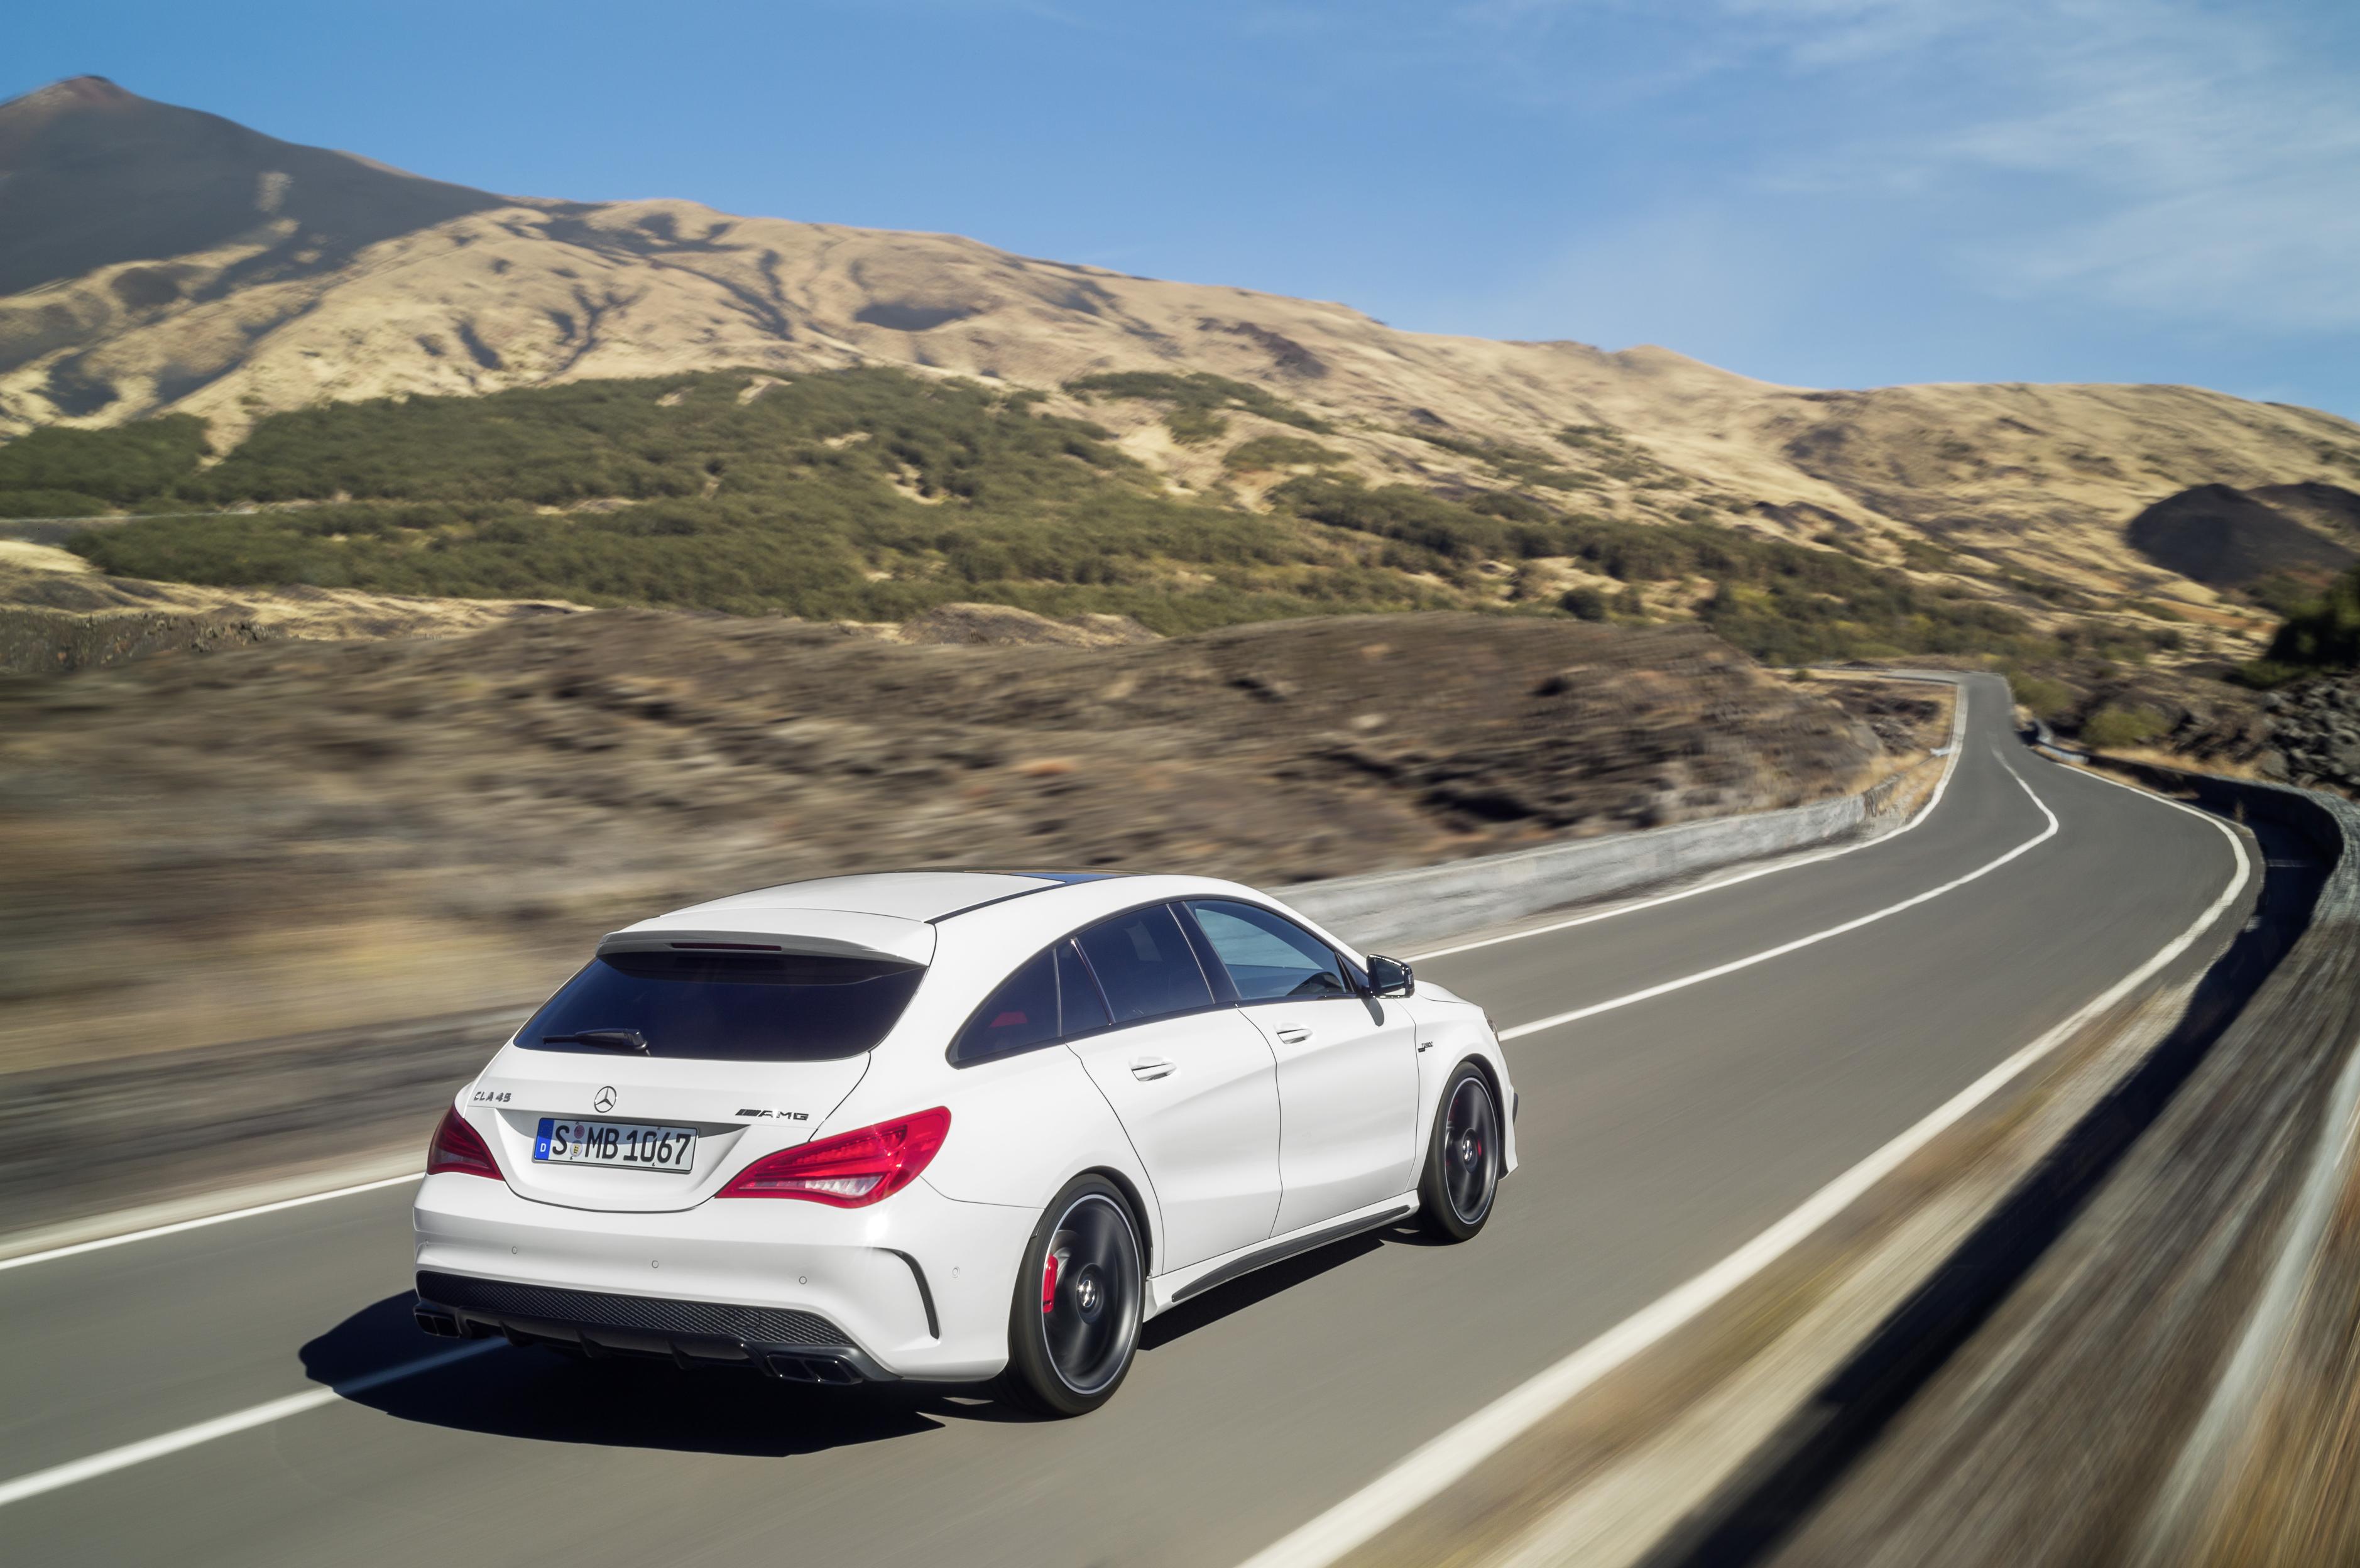 2015 Mercedes CLA Shooting Brake Prices Announced: 45 AMG Starts at €57,268 in Germany 